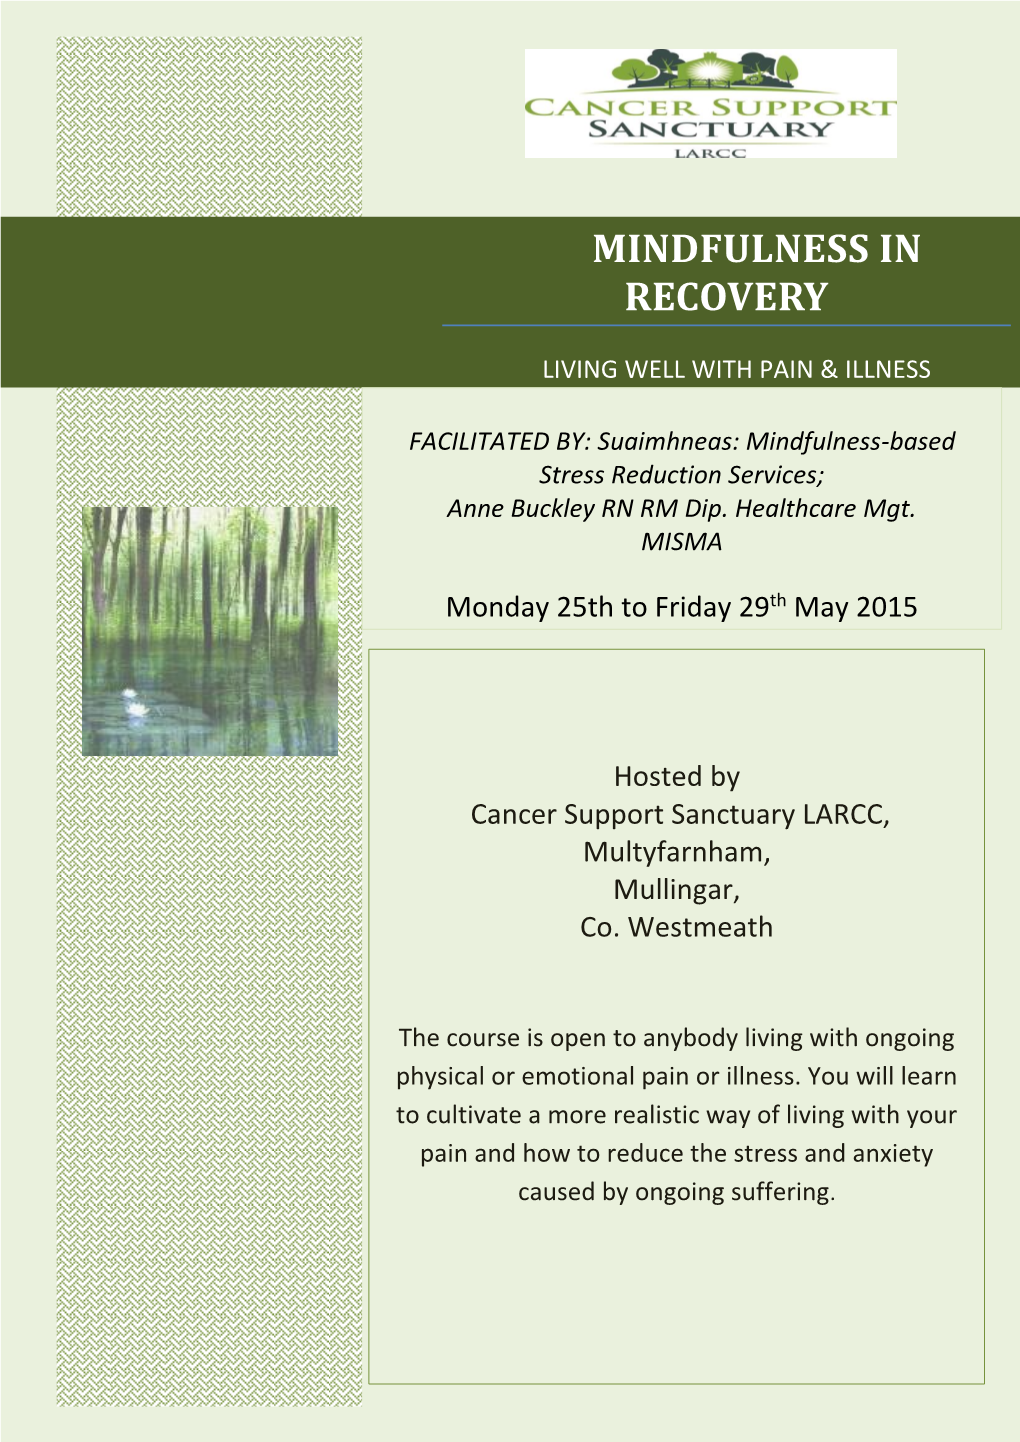 Mindfulness in Recovery